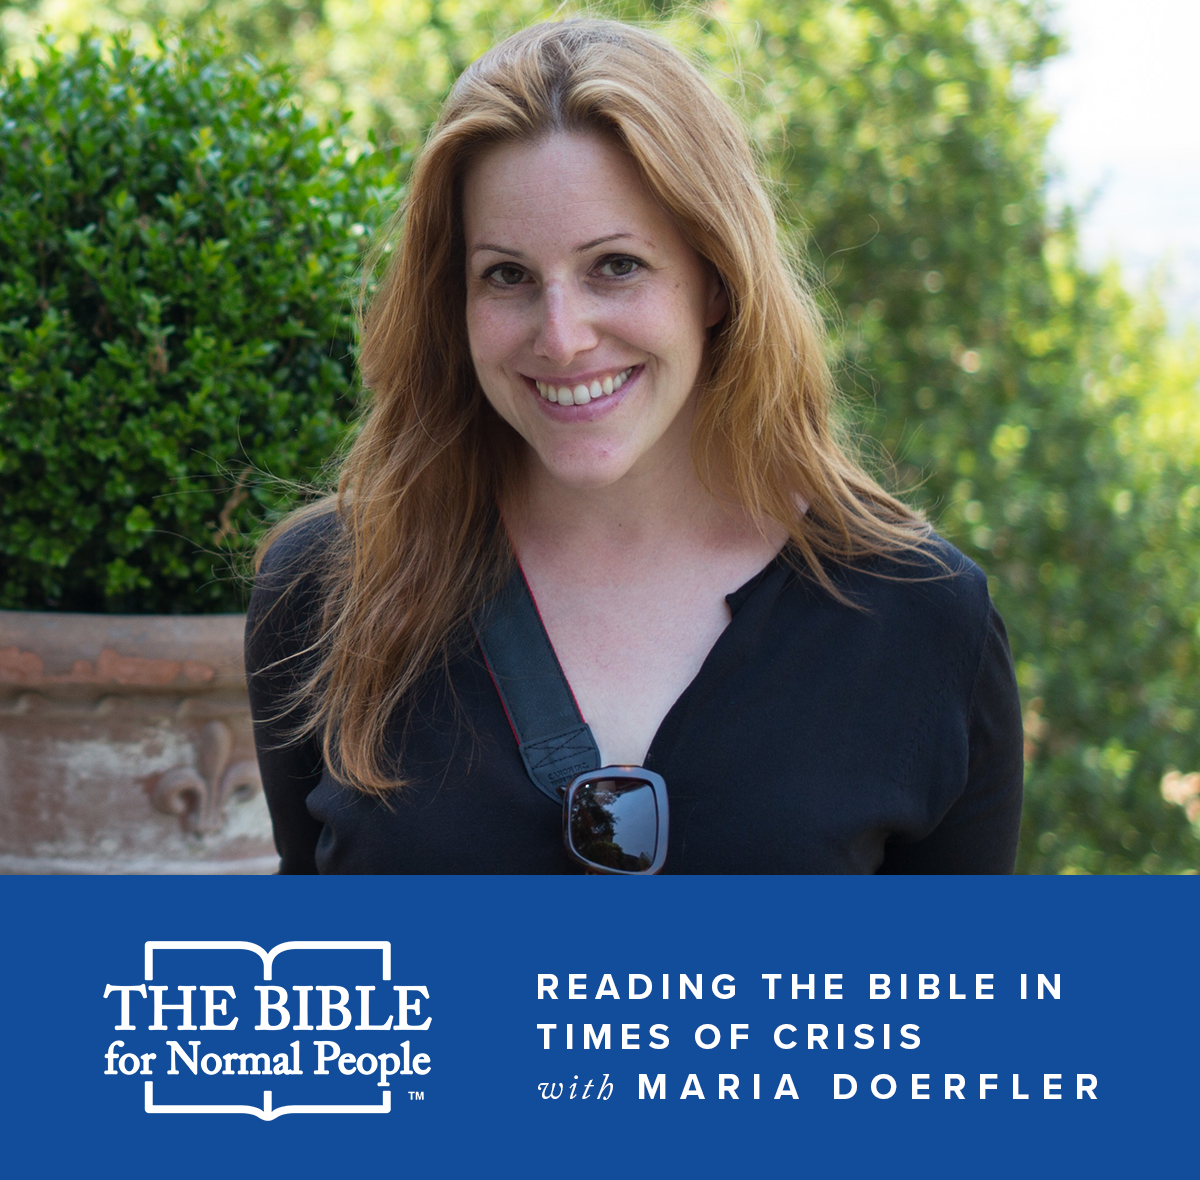 Interview with Maria Doerfler: Reading the Bible in Times of Crisis